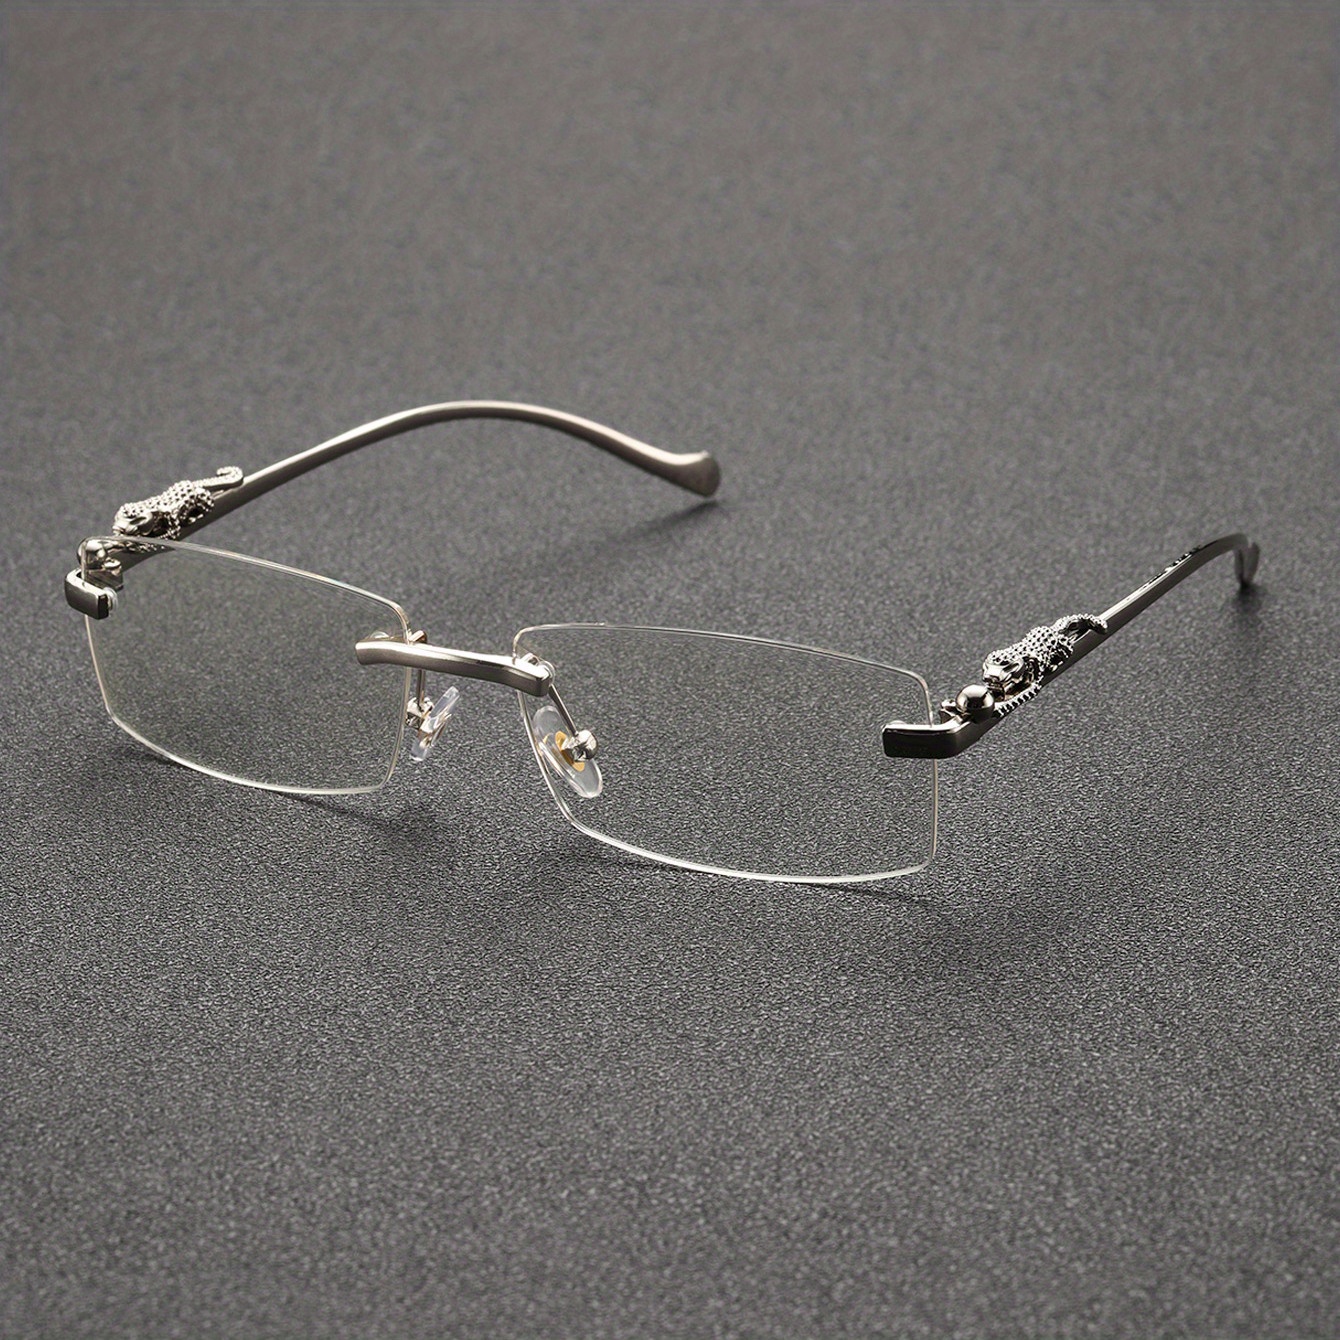 Fashion Men's Glasses Men Rimless Metal Square Glasses, ideal choice for  gifts